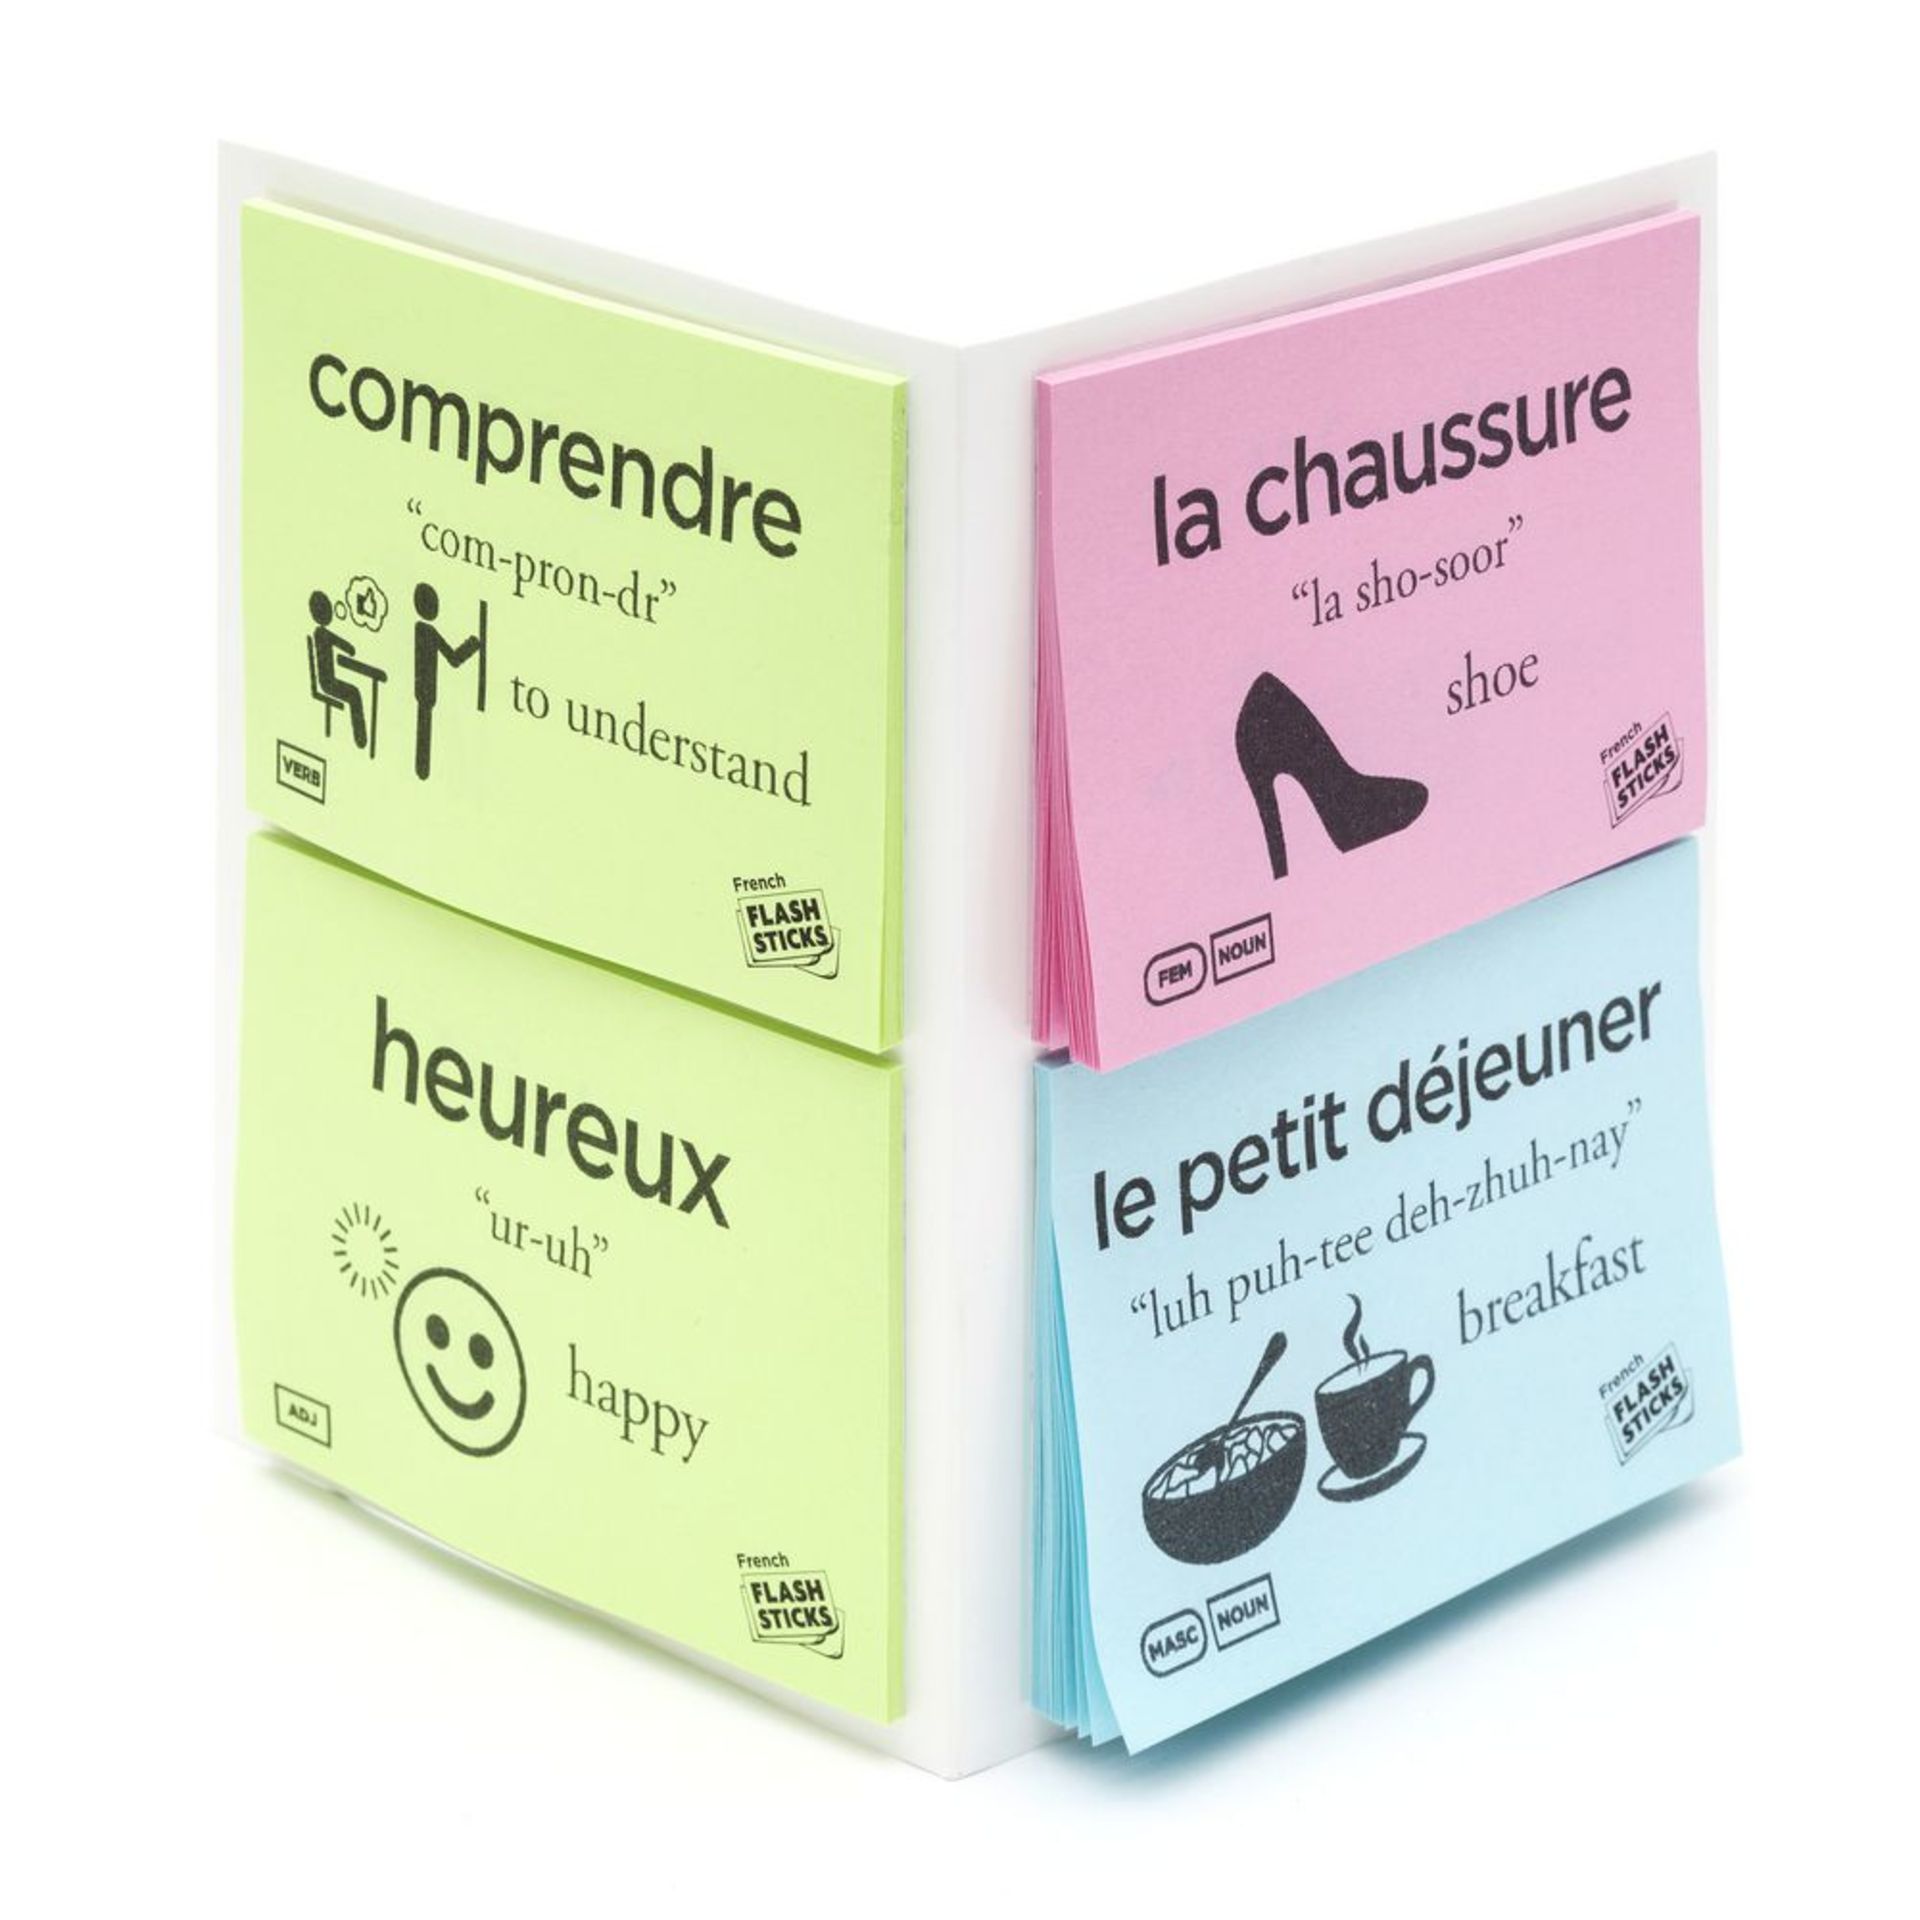 V Brand New Pack Of Approx 10 Flash Sticks To aid Learning French Amazon Price £5.25 EACH X 2 YOUR